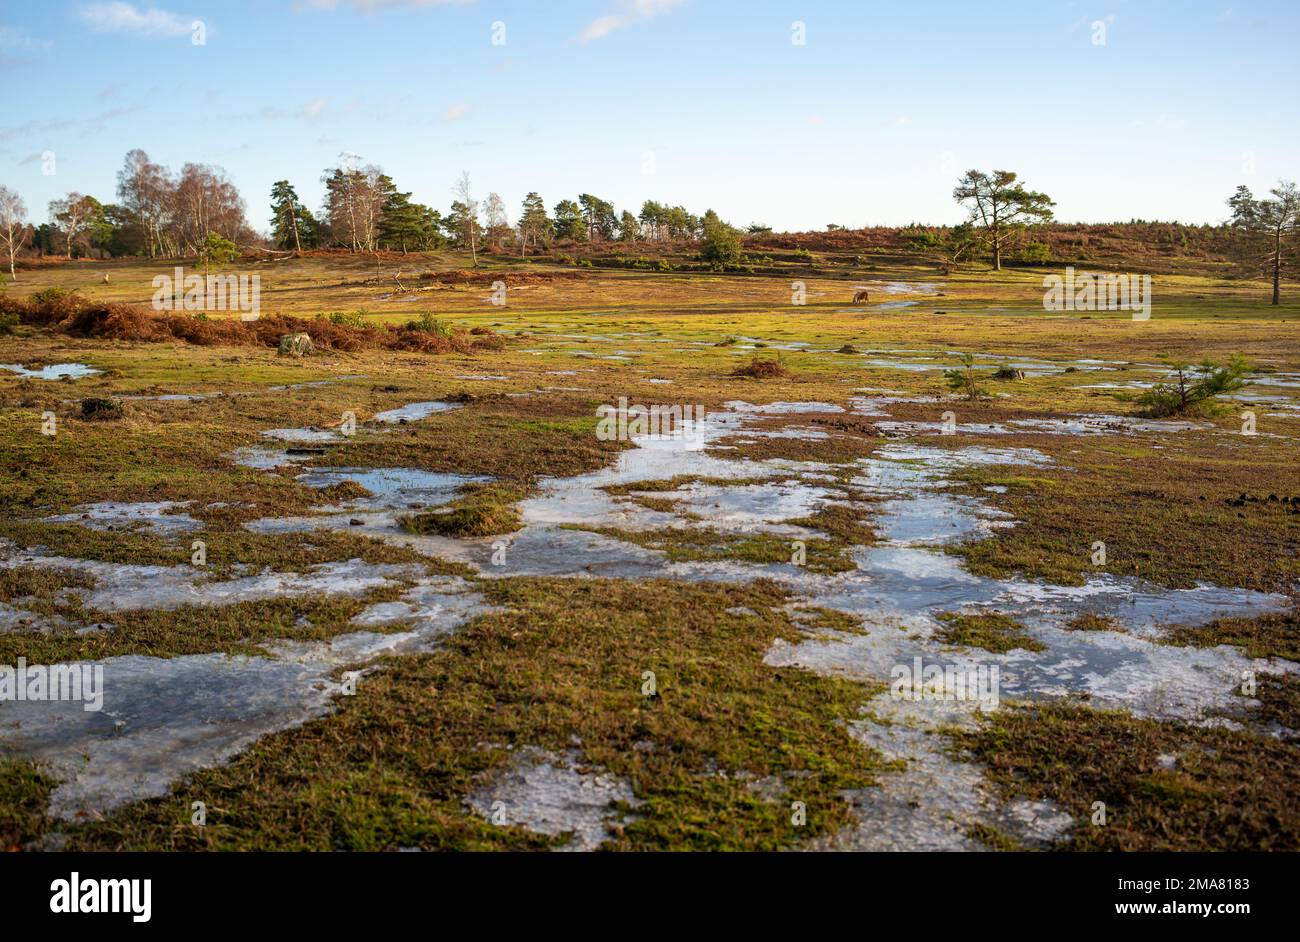 Frozen water visually highlighting a wetland bog area in the New Forest Hampshire. The area has been managed removing trees to regenerate the habitat. Stock Photo